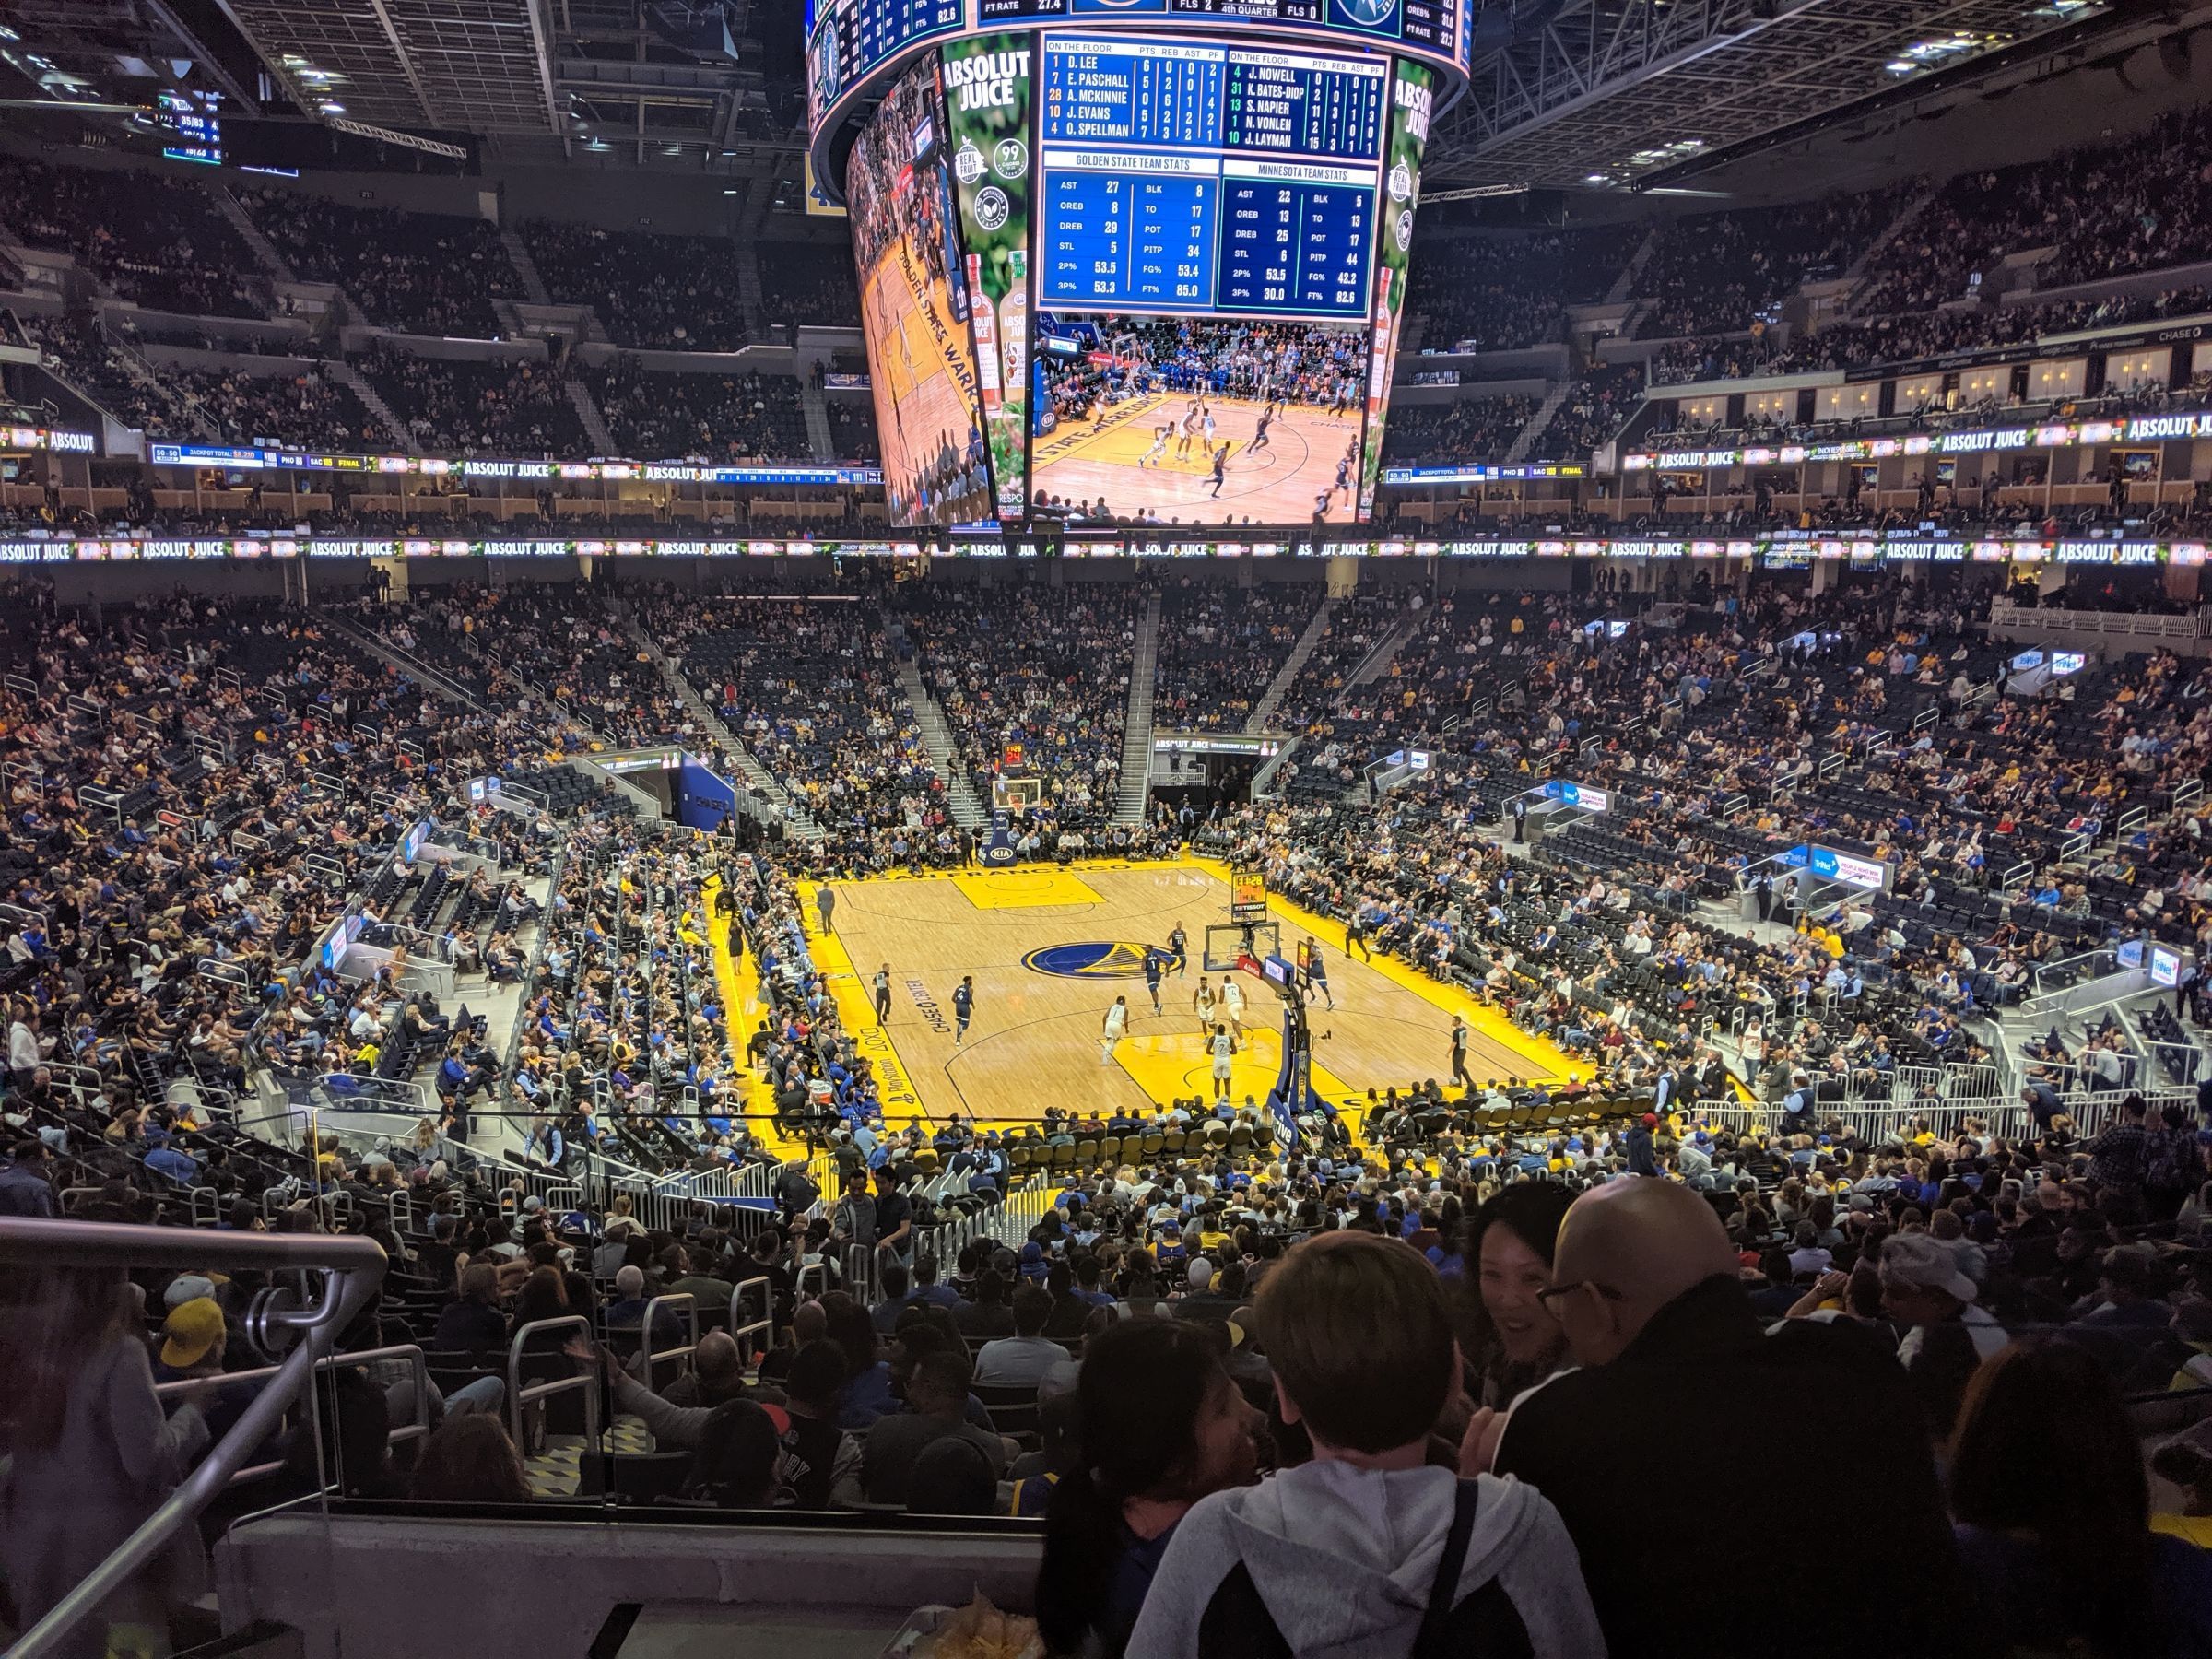 section 128, row 4 seat view  for basketball - chase center